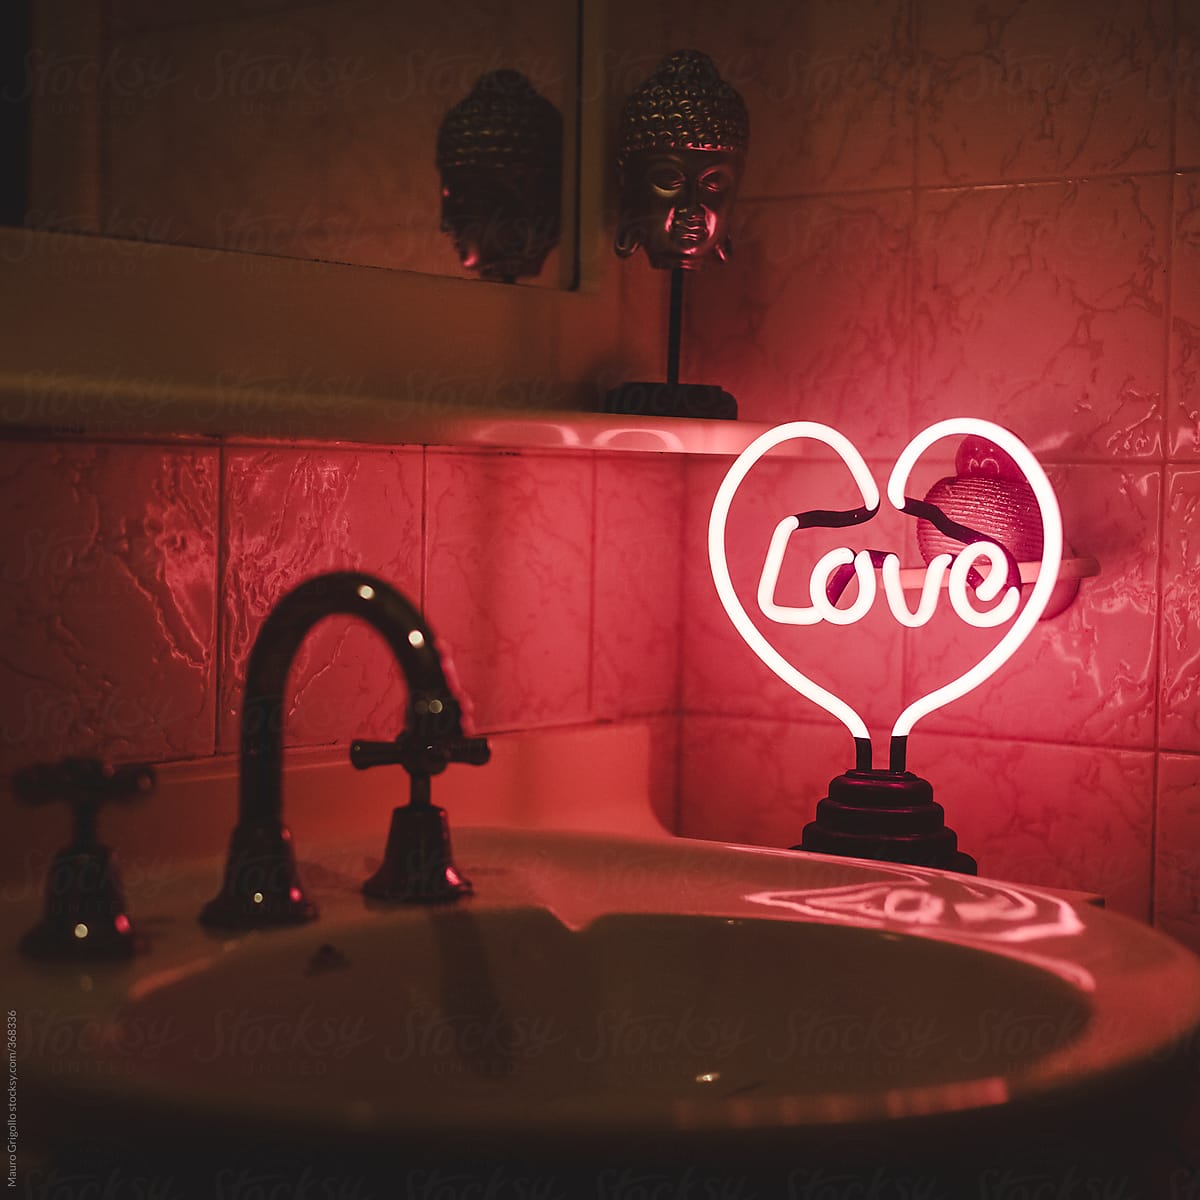 Love neon sign inside a toilet